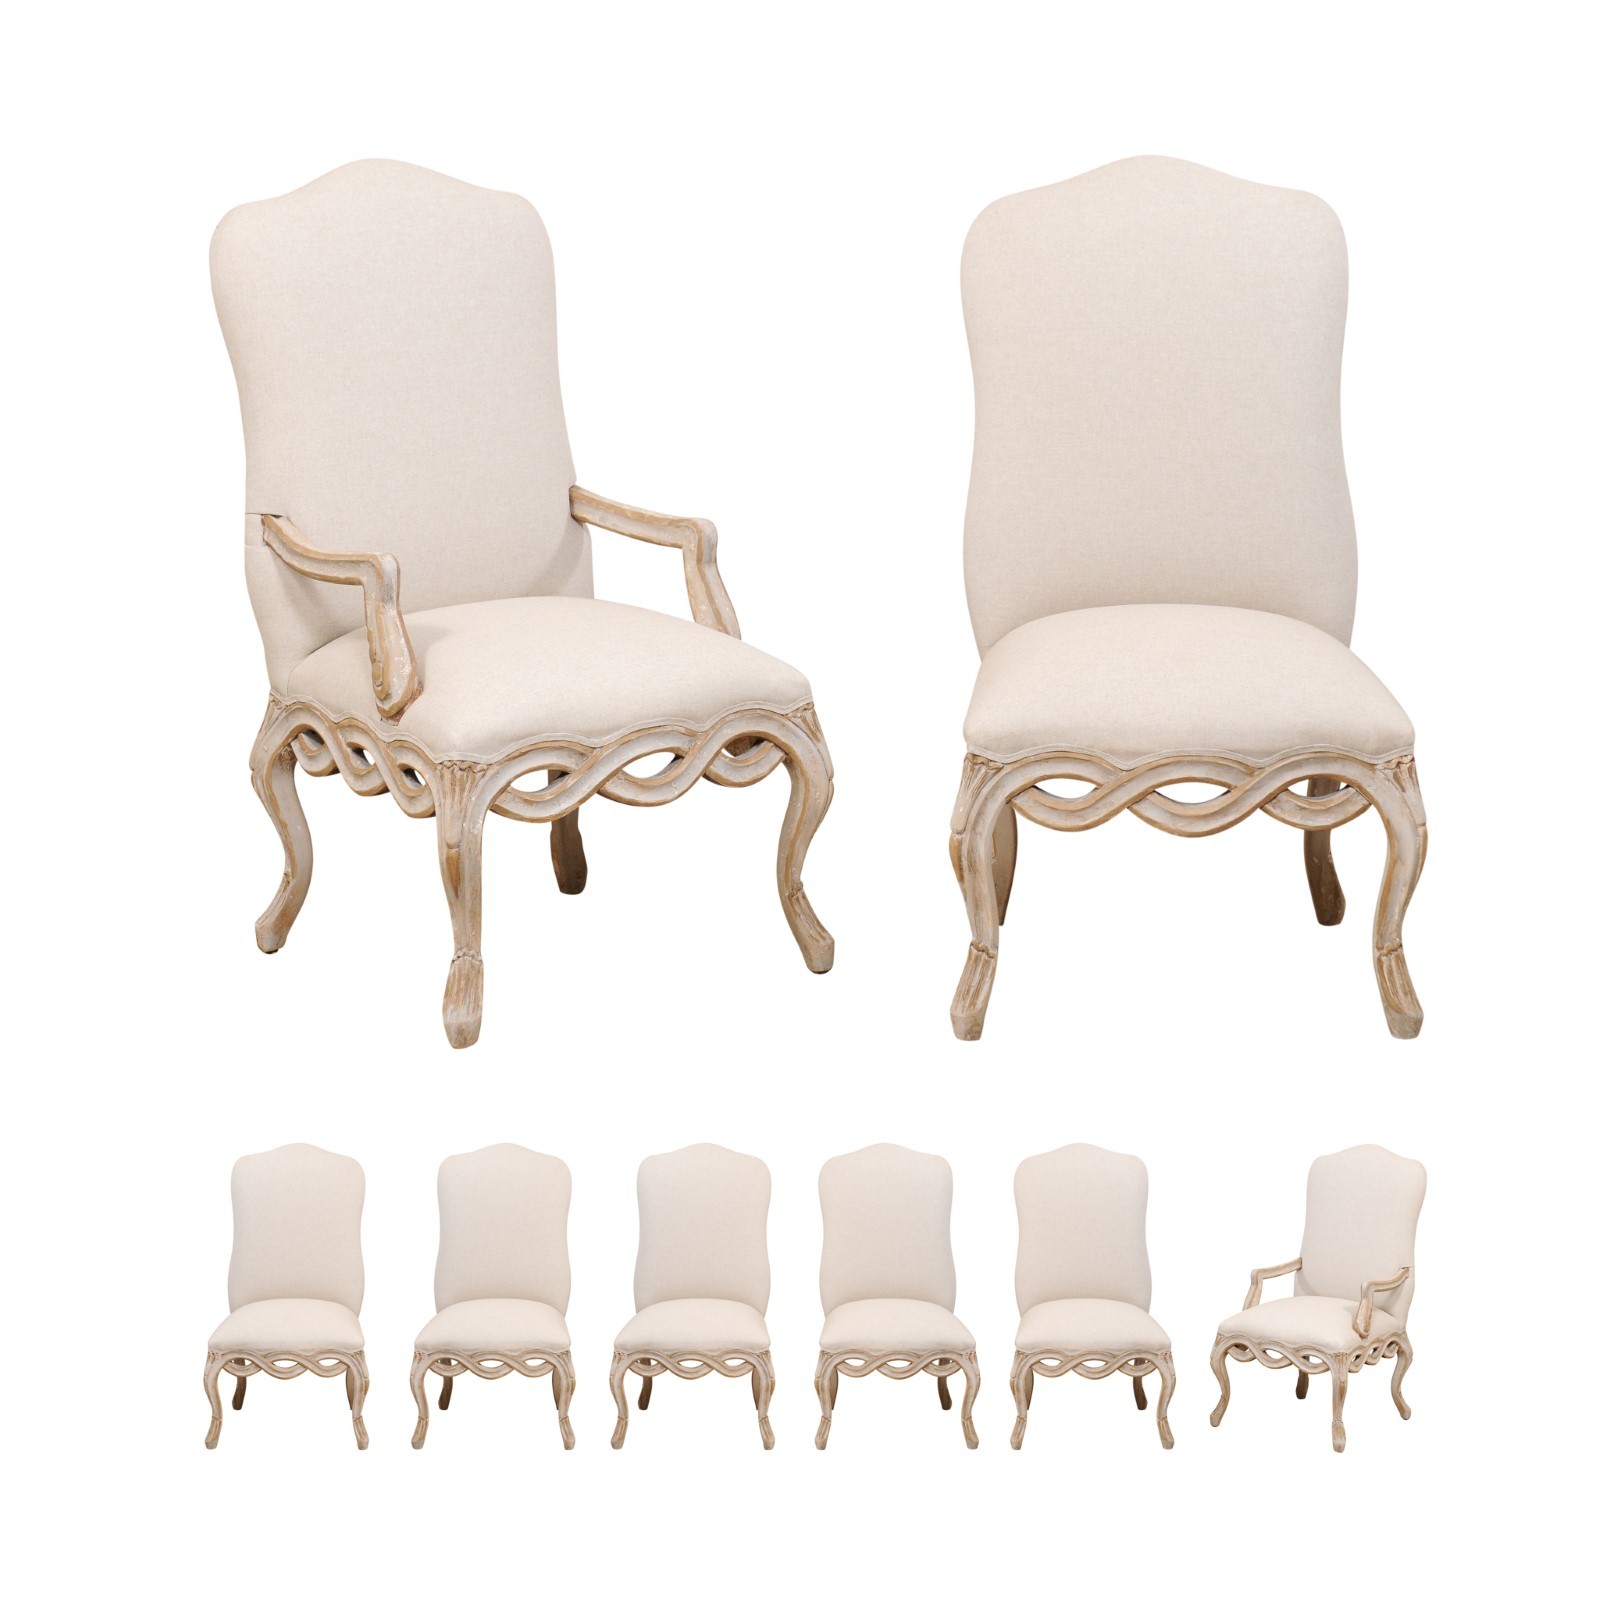 Set of Italian-Style Dining Chairs, XL-Seat